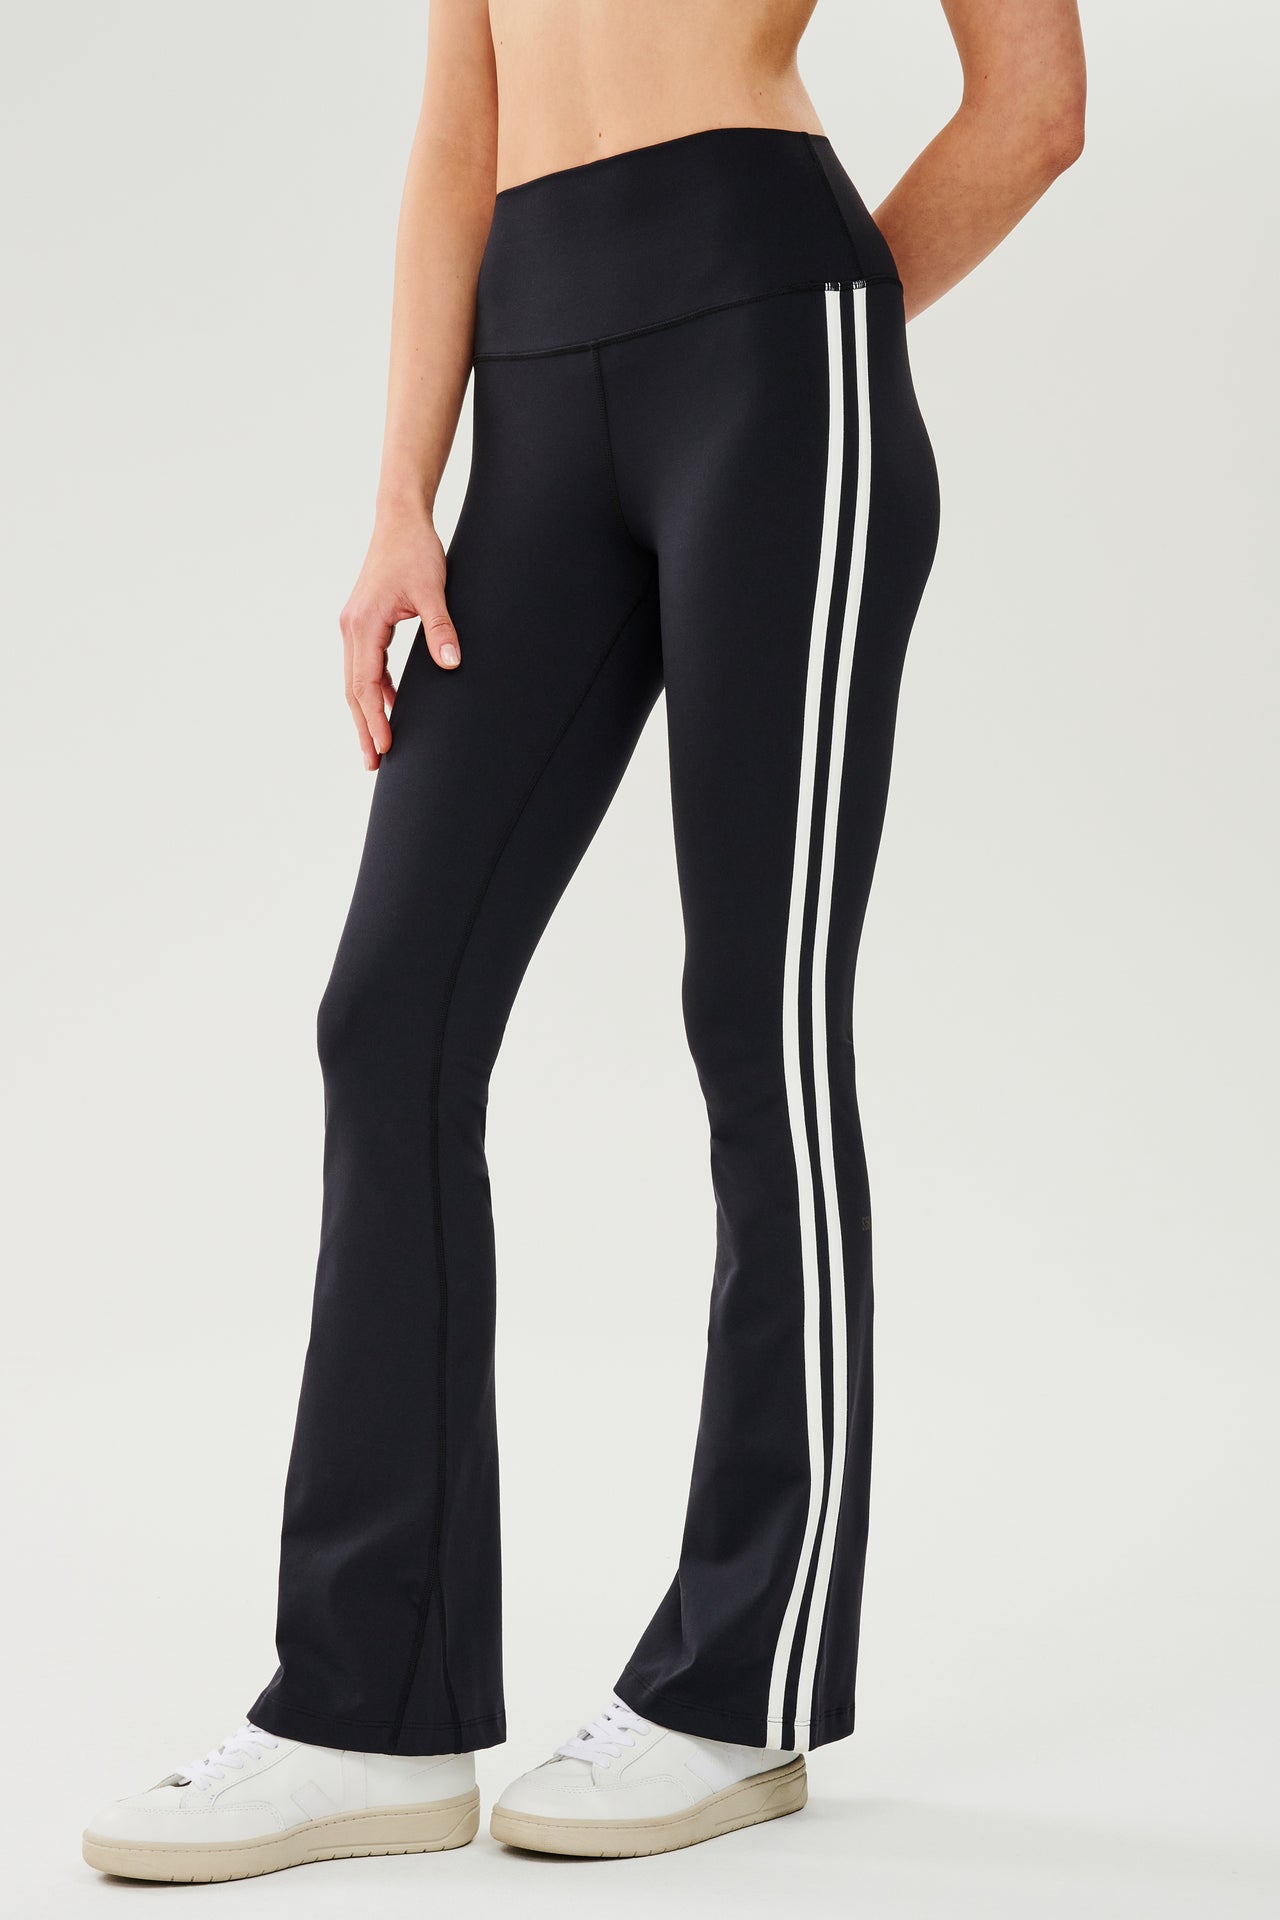 Front view of woman wearing black high waist below ankle length legging with wide flared bottoms with double white side stripes on both legs.Paired with white shoes.